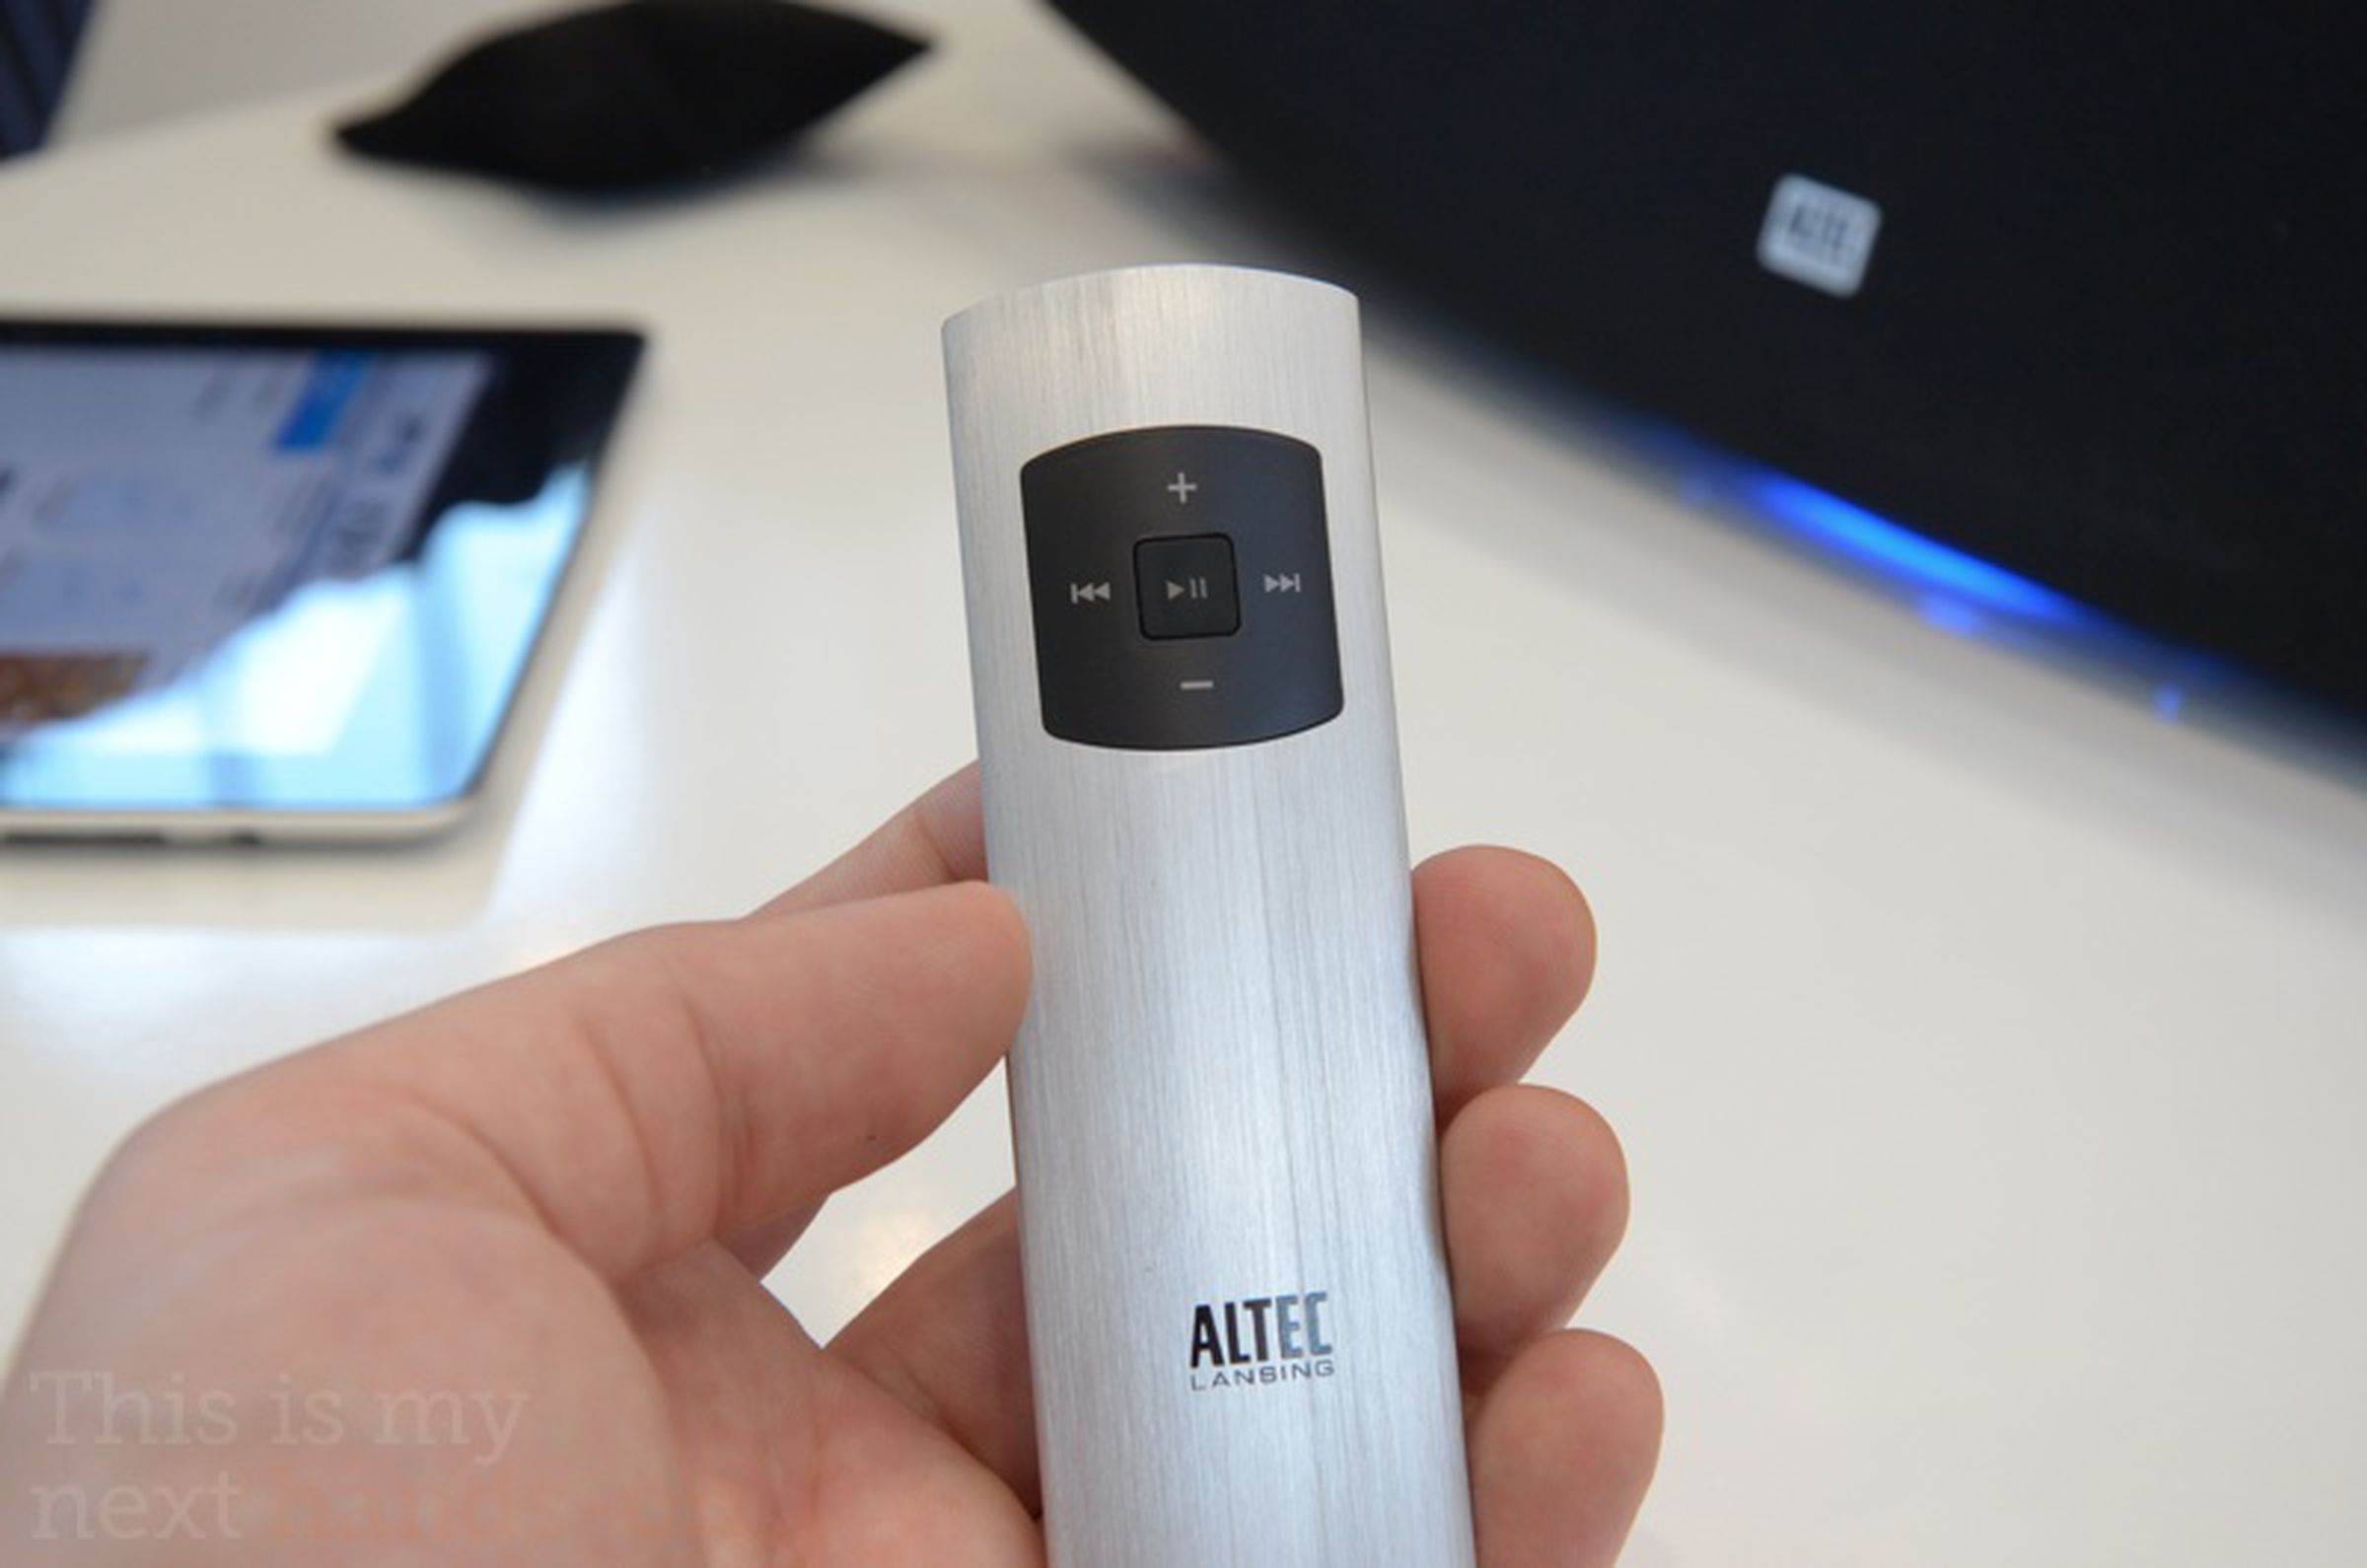 Altec Lansing inAir 5000 hands on pictures